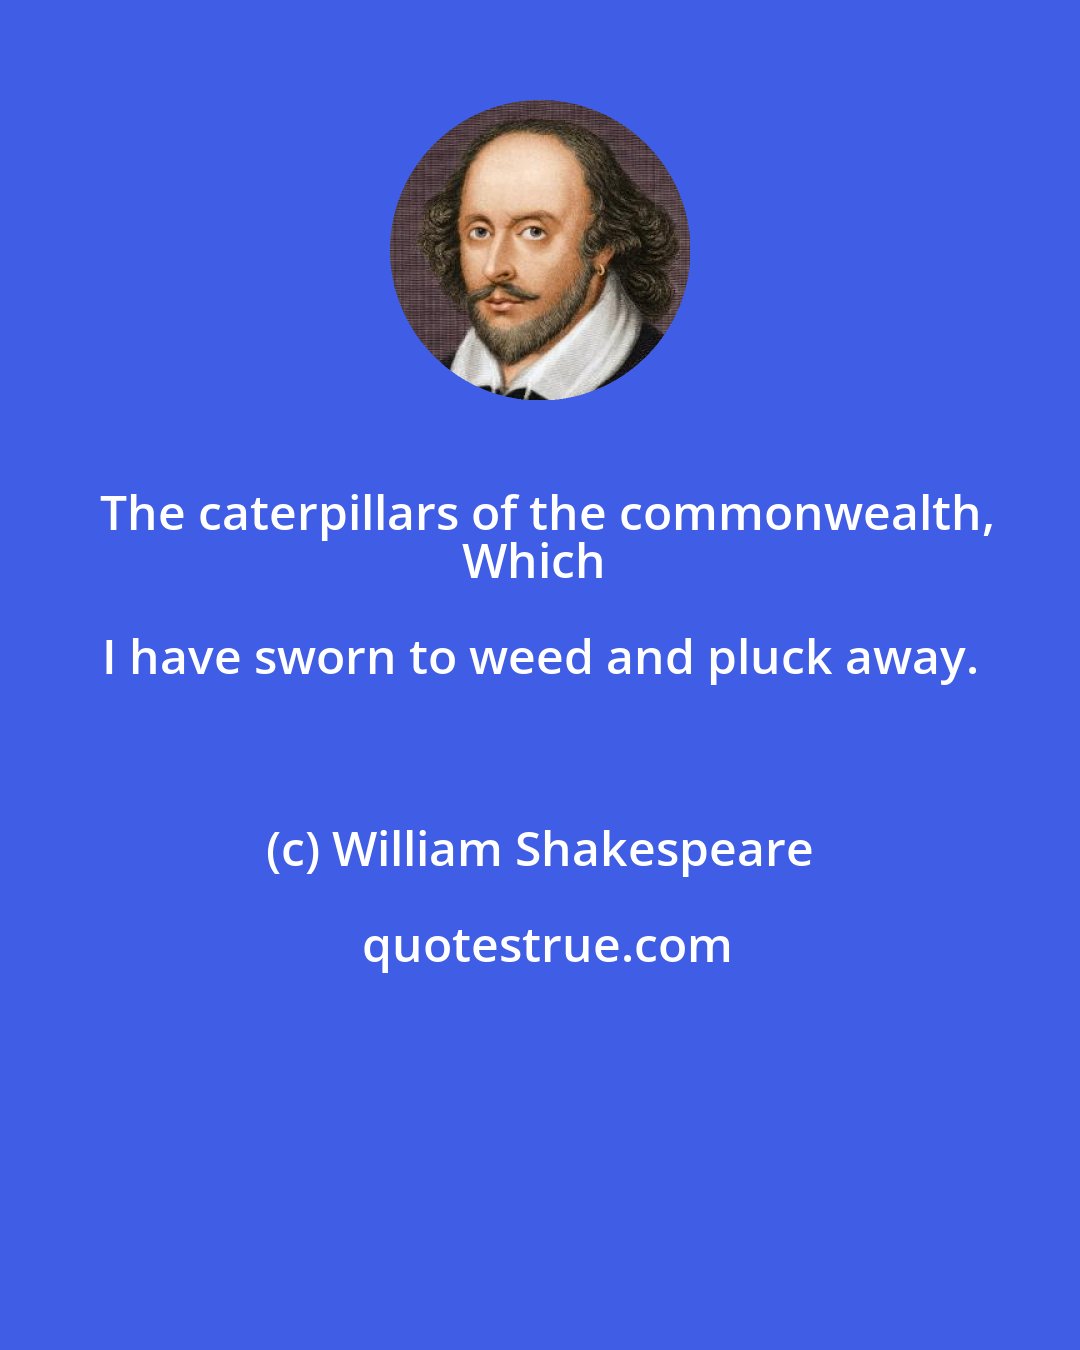 William Shakespeare: The caterpillars of the commonwealth,
Which I have sworn to weed and pluck away.